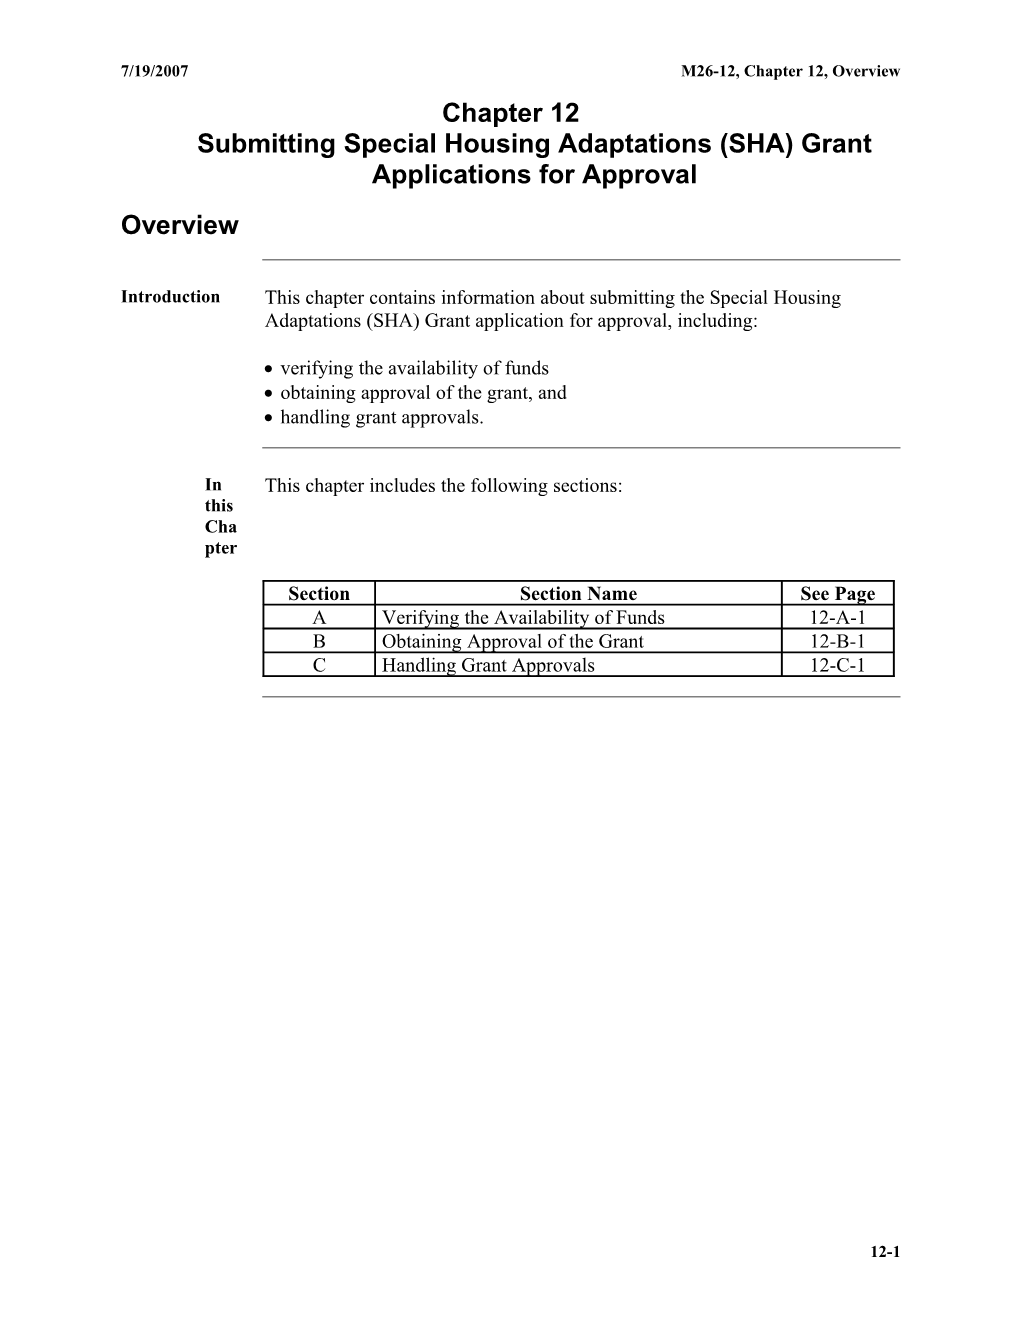 Chapter 12Submitting Special Housing Adaptations (SHA) Grant Applications for Approval